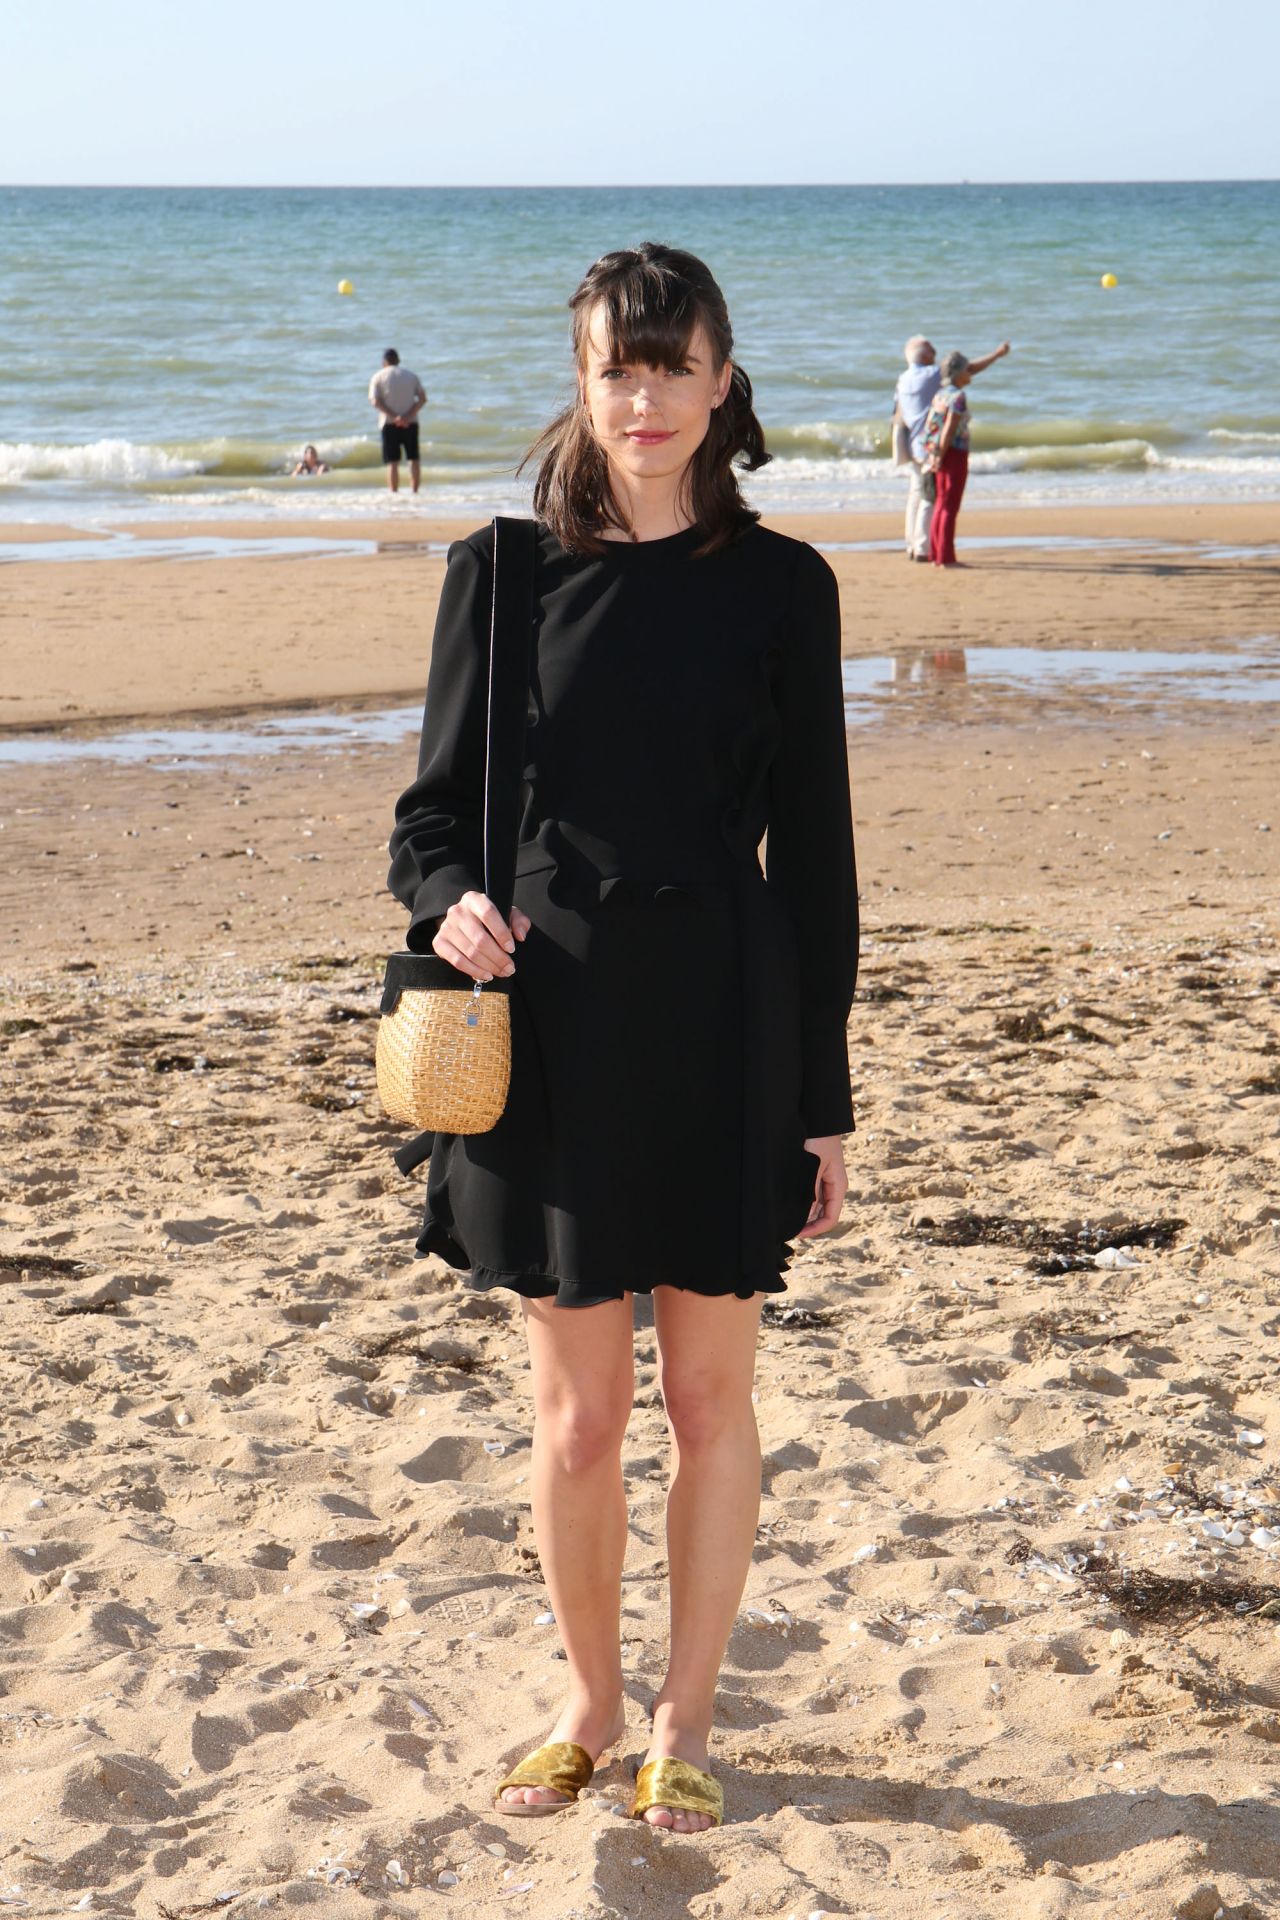 Stacy Martin Le Redoutable Photocall At Cabourg Film Festival 06 17 2017